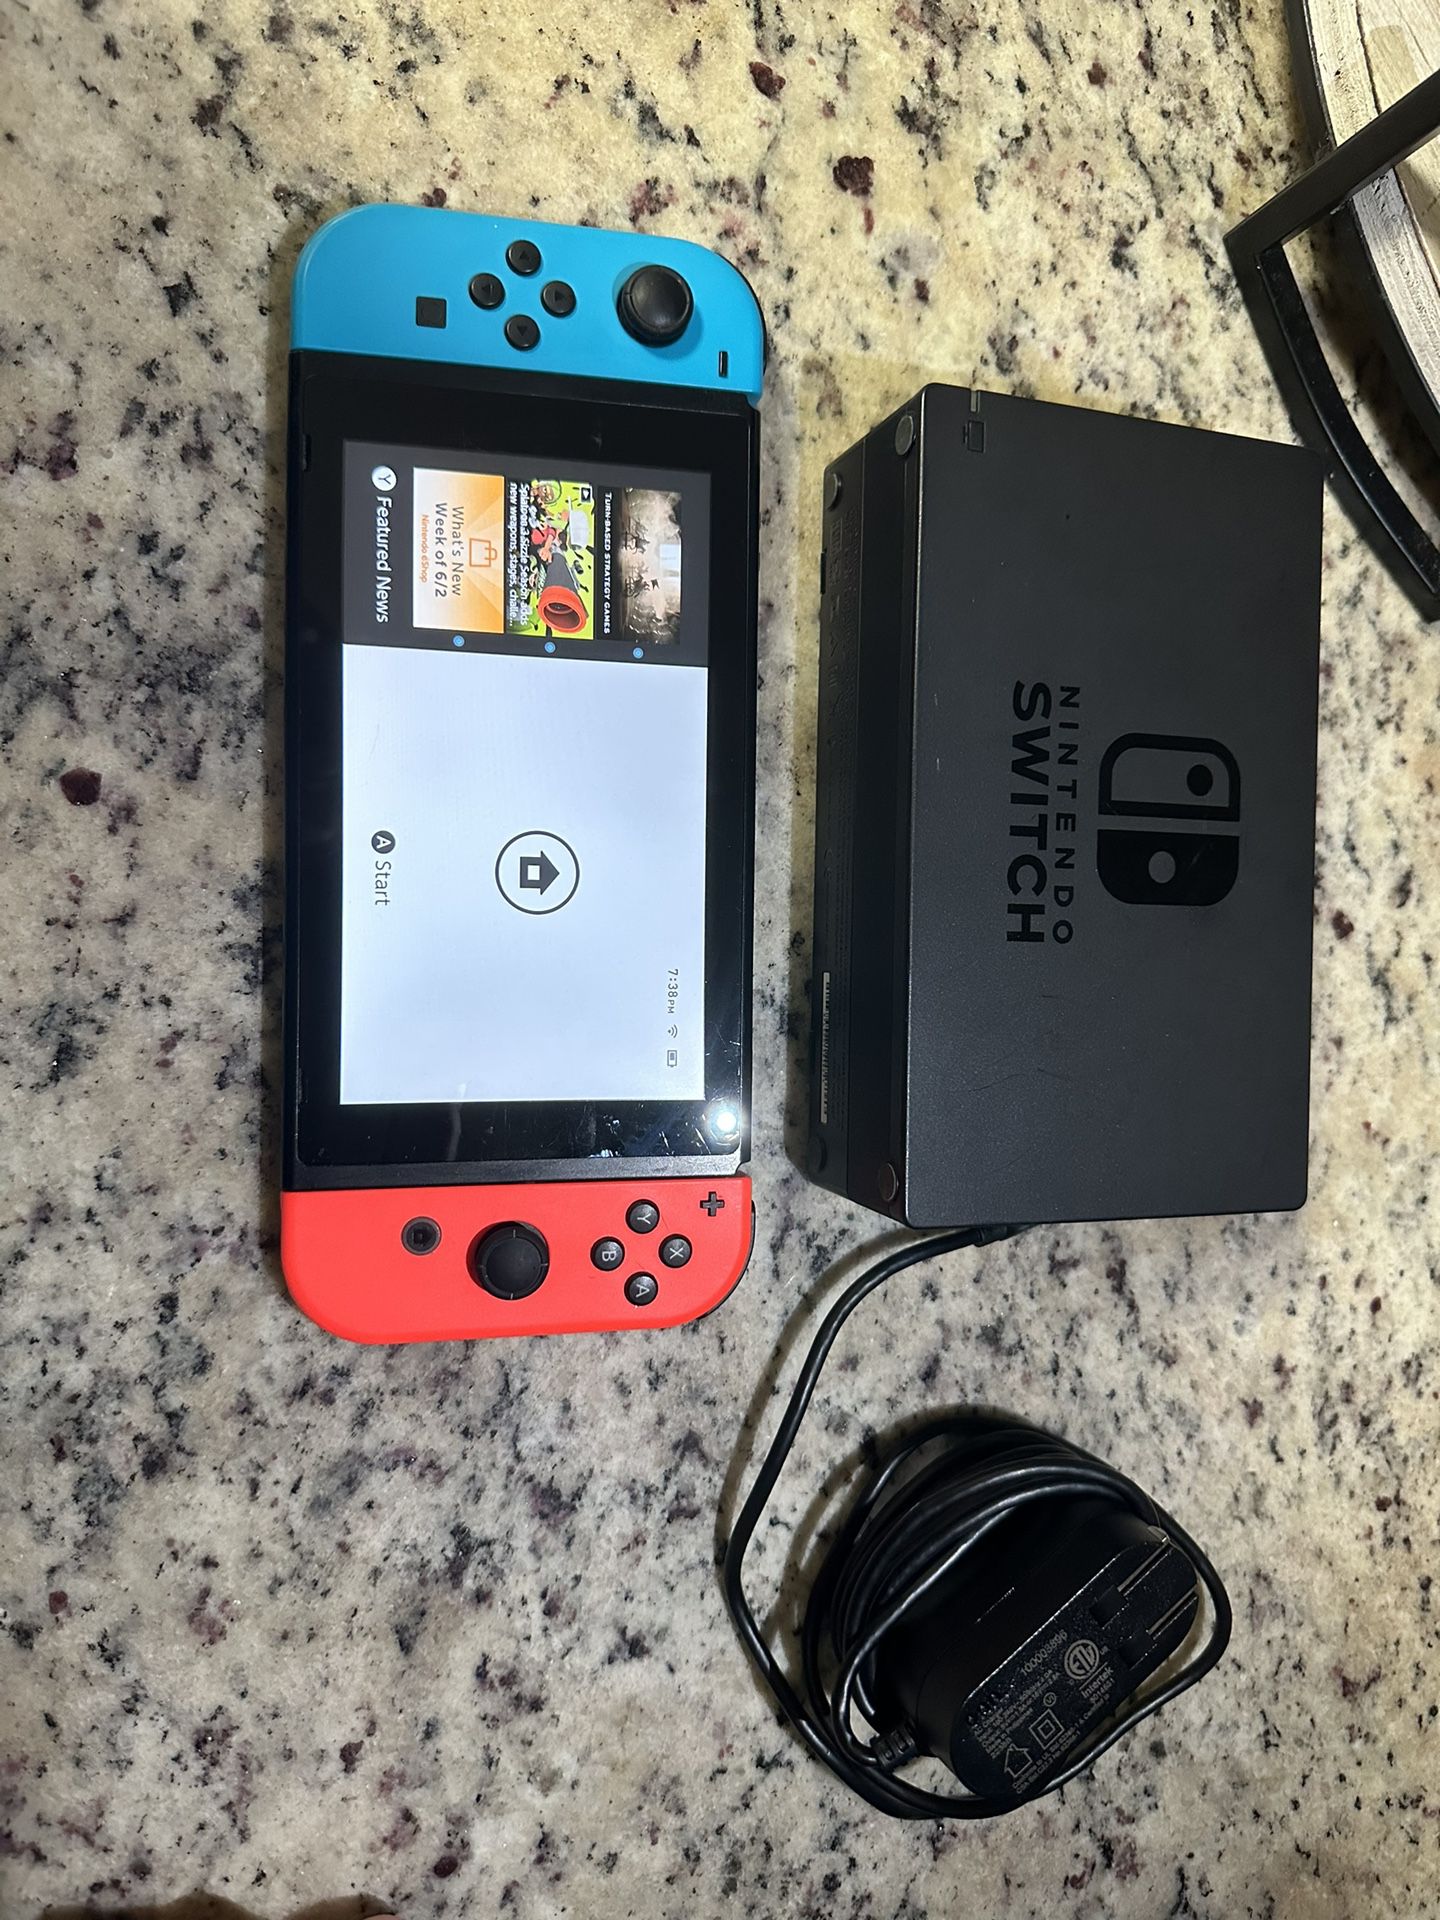 Nintendo Switch with dock and charger